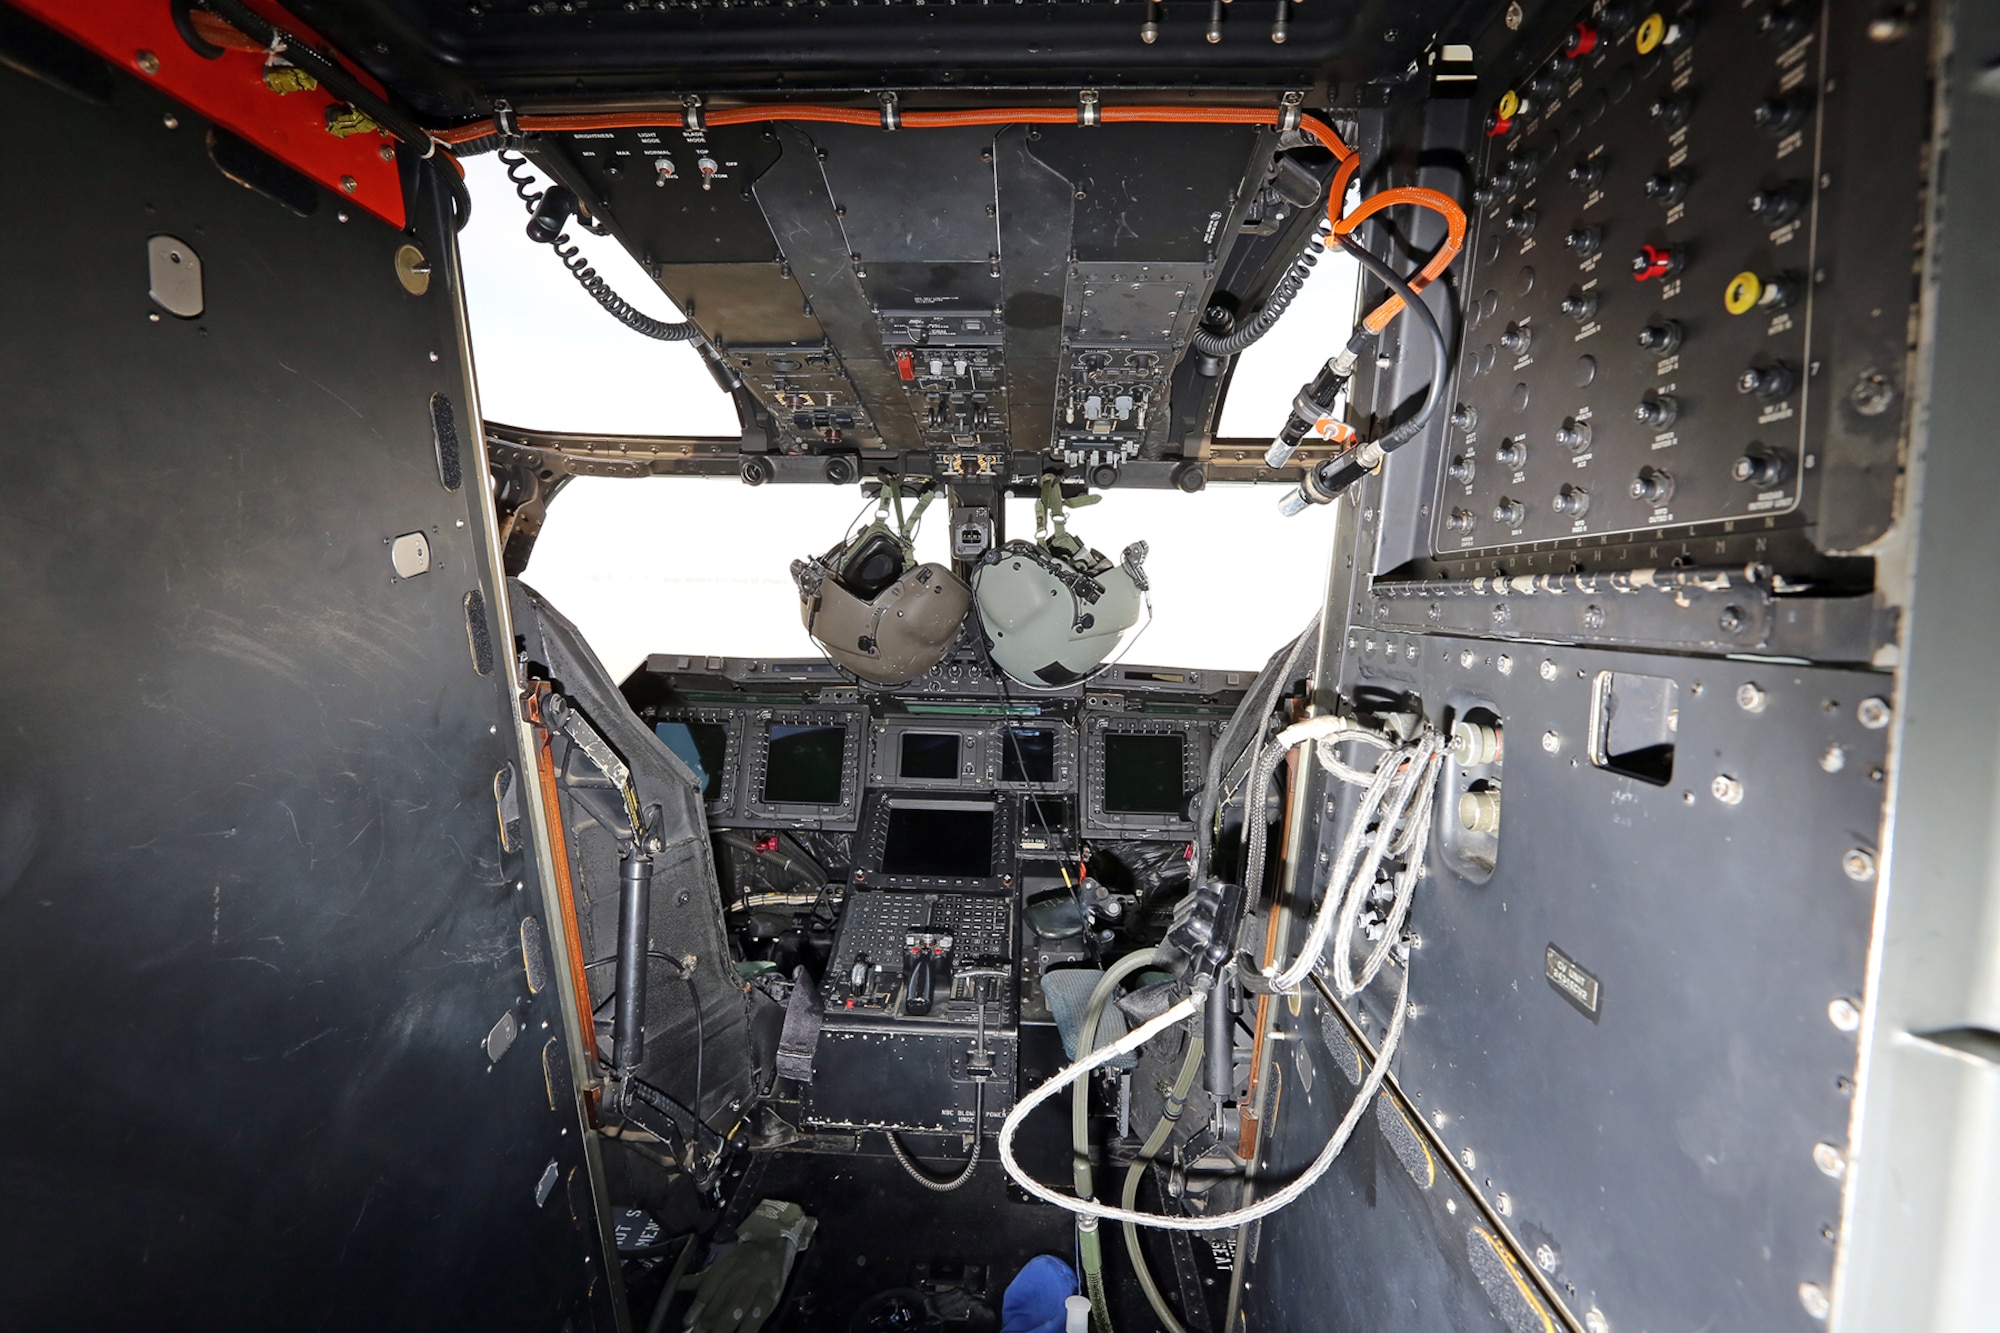 DAYTON, Ohio -- The Bell-Boeing CV-22B interior at the National Museum of the U.S. Air Force. (U.S. Air Force photo by Don Popp)